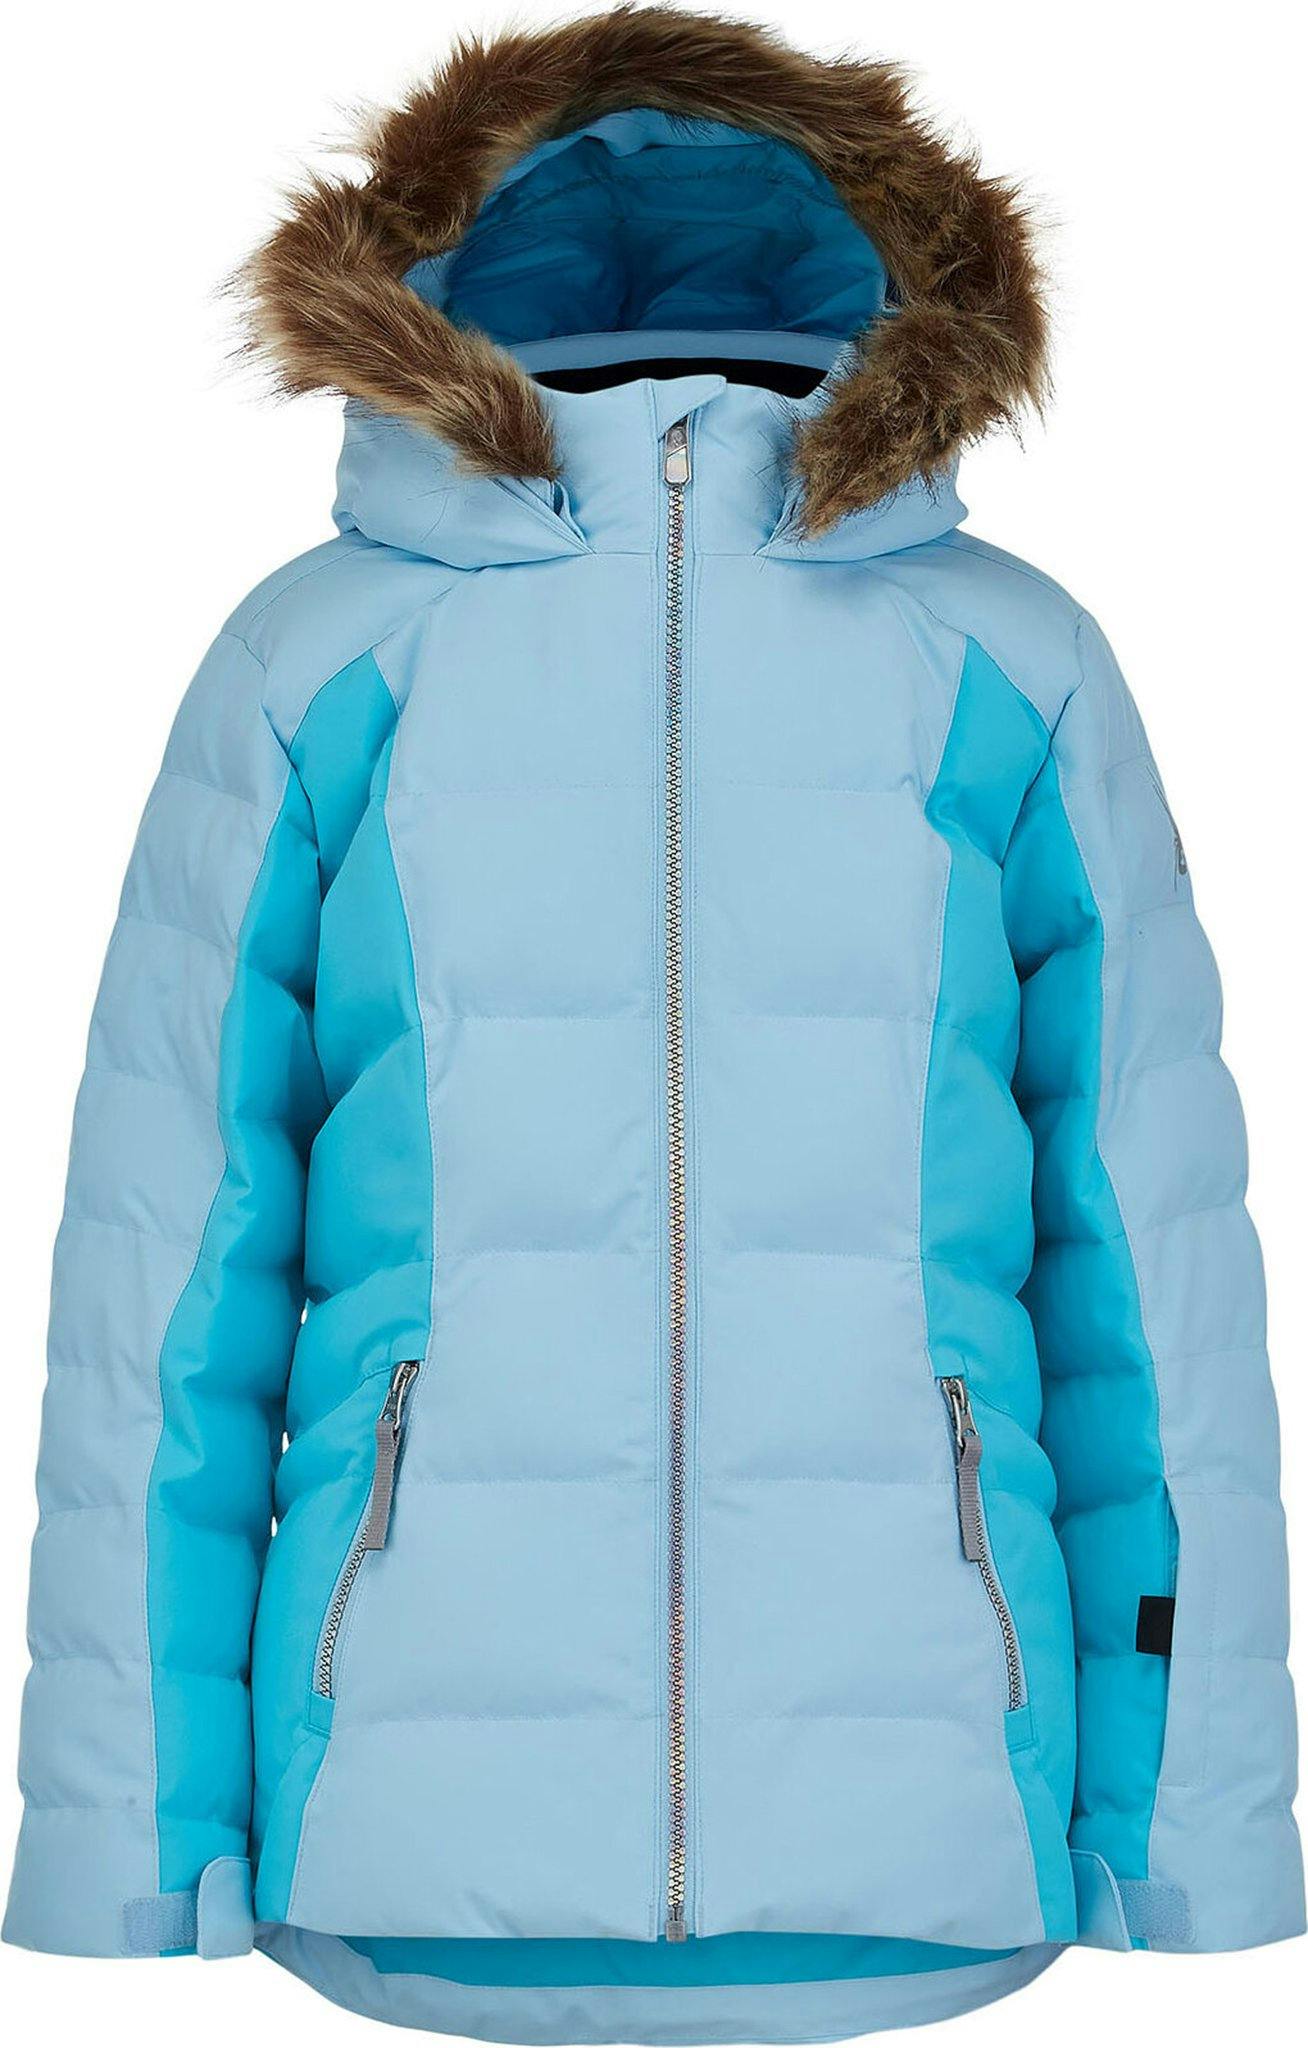 Product image for Atlas Synthetic Jacket - Girls